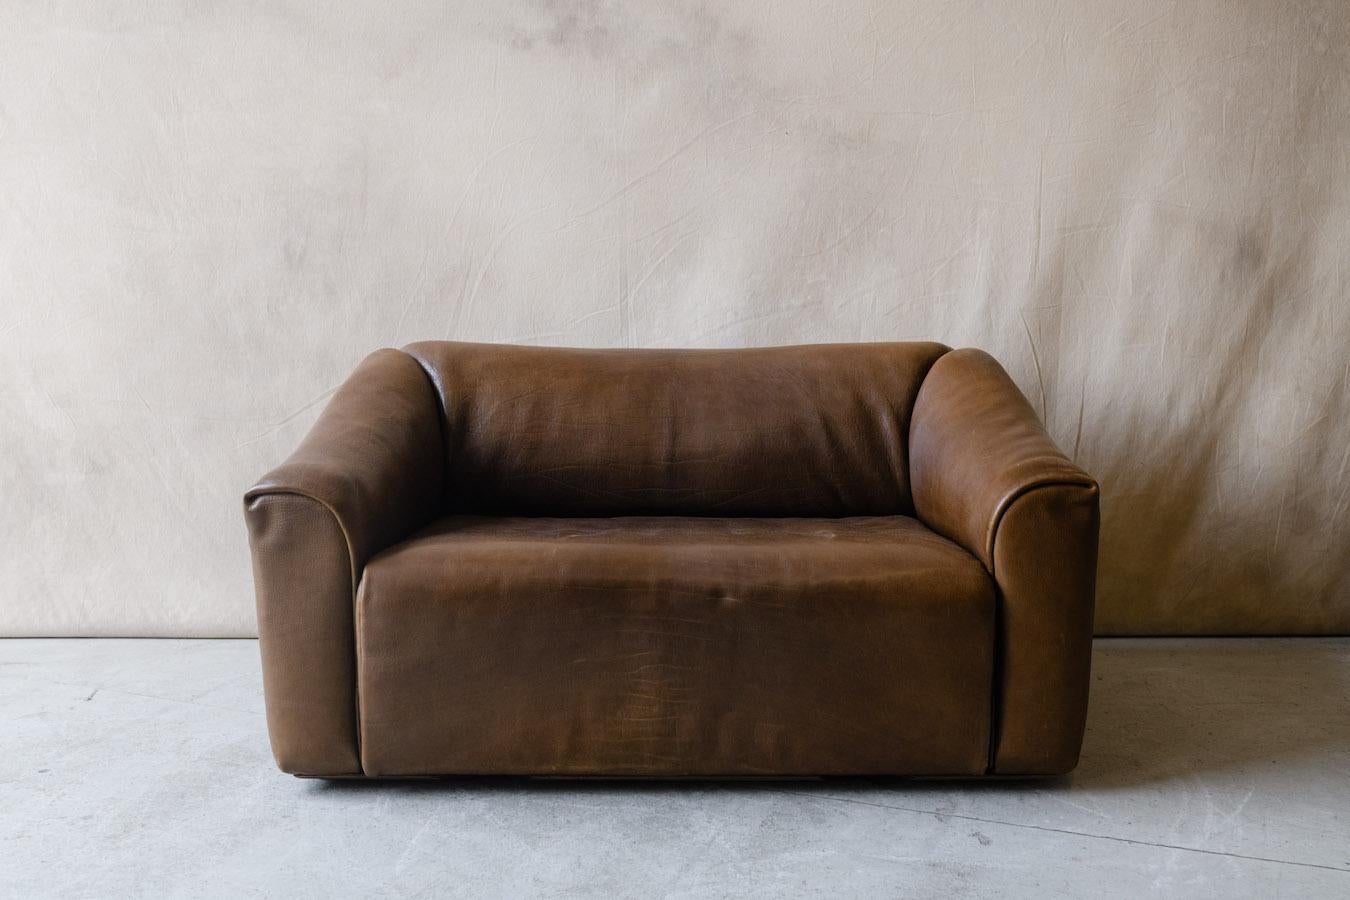 Vintage Swiss DS-47 Buffalo leather 2-seater sofa by De Sede, 1970s. The thick neck leather is 5mm thick and very durable. The seat extends up to 9